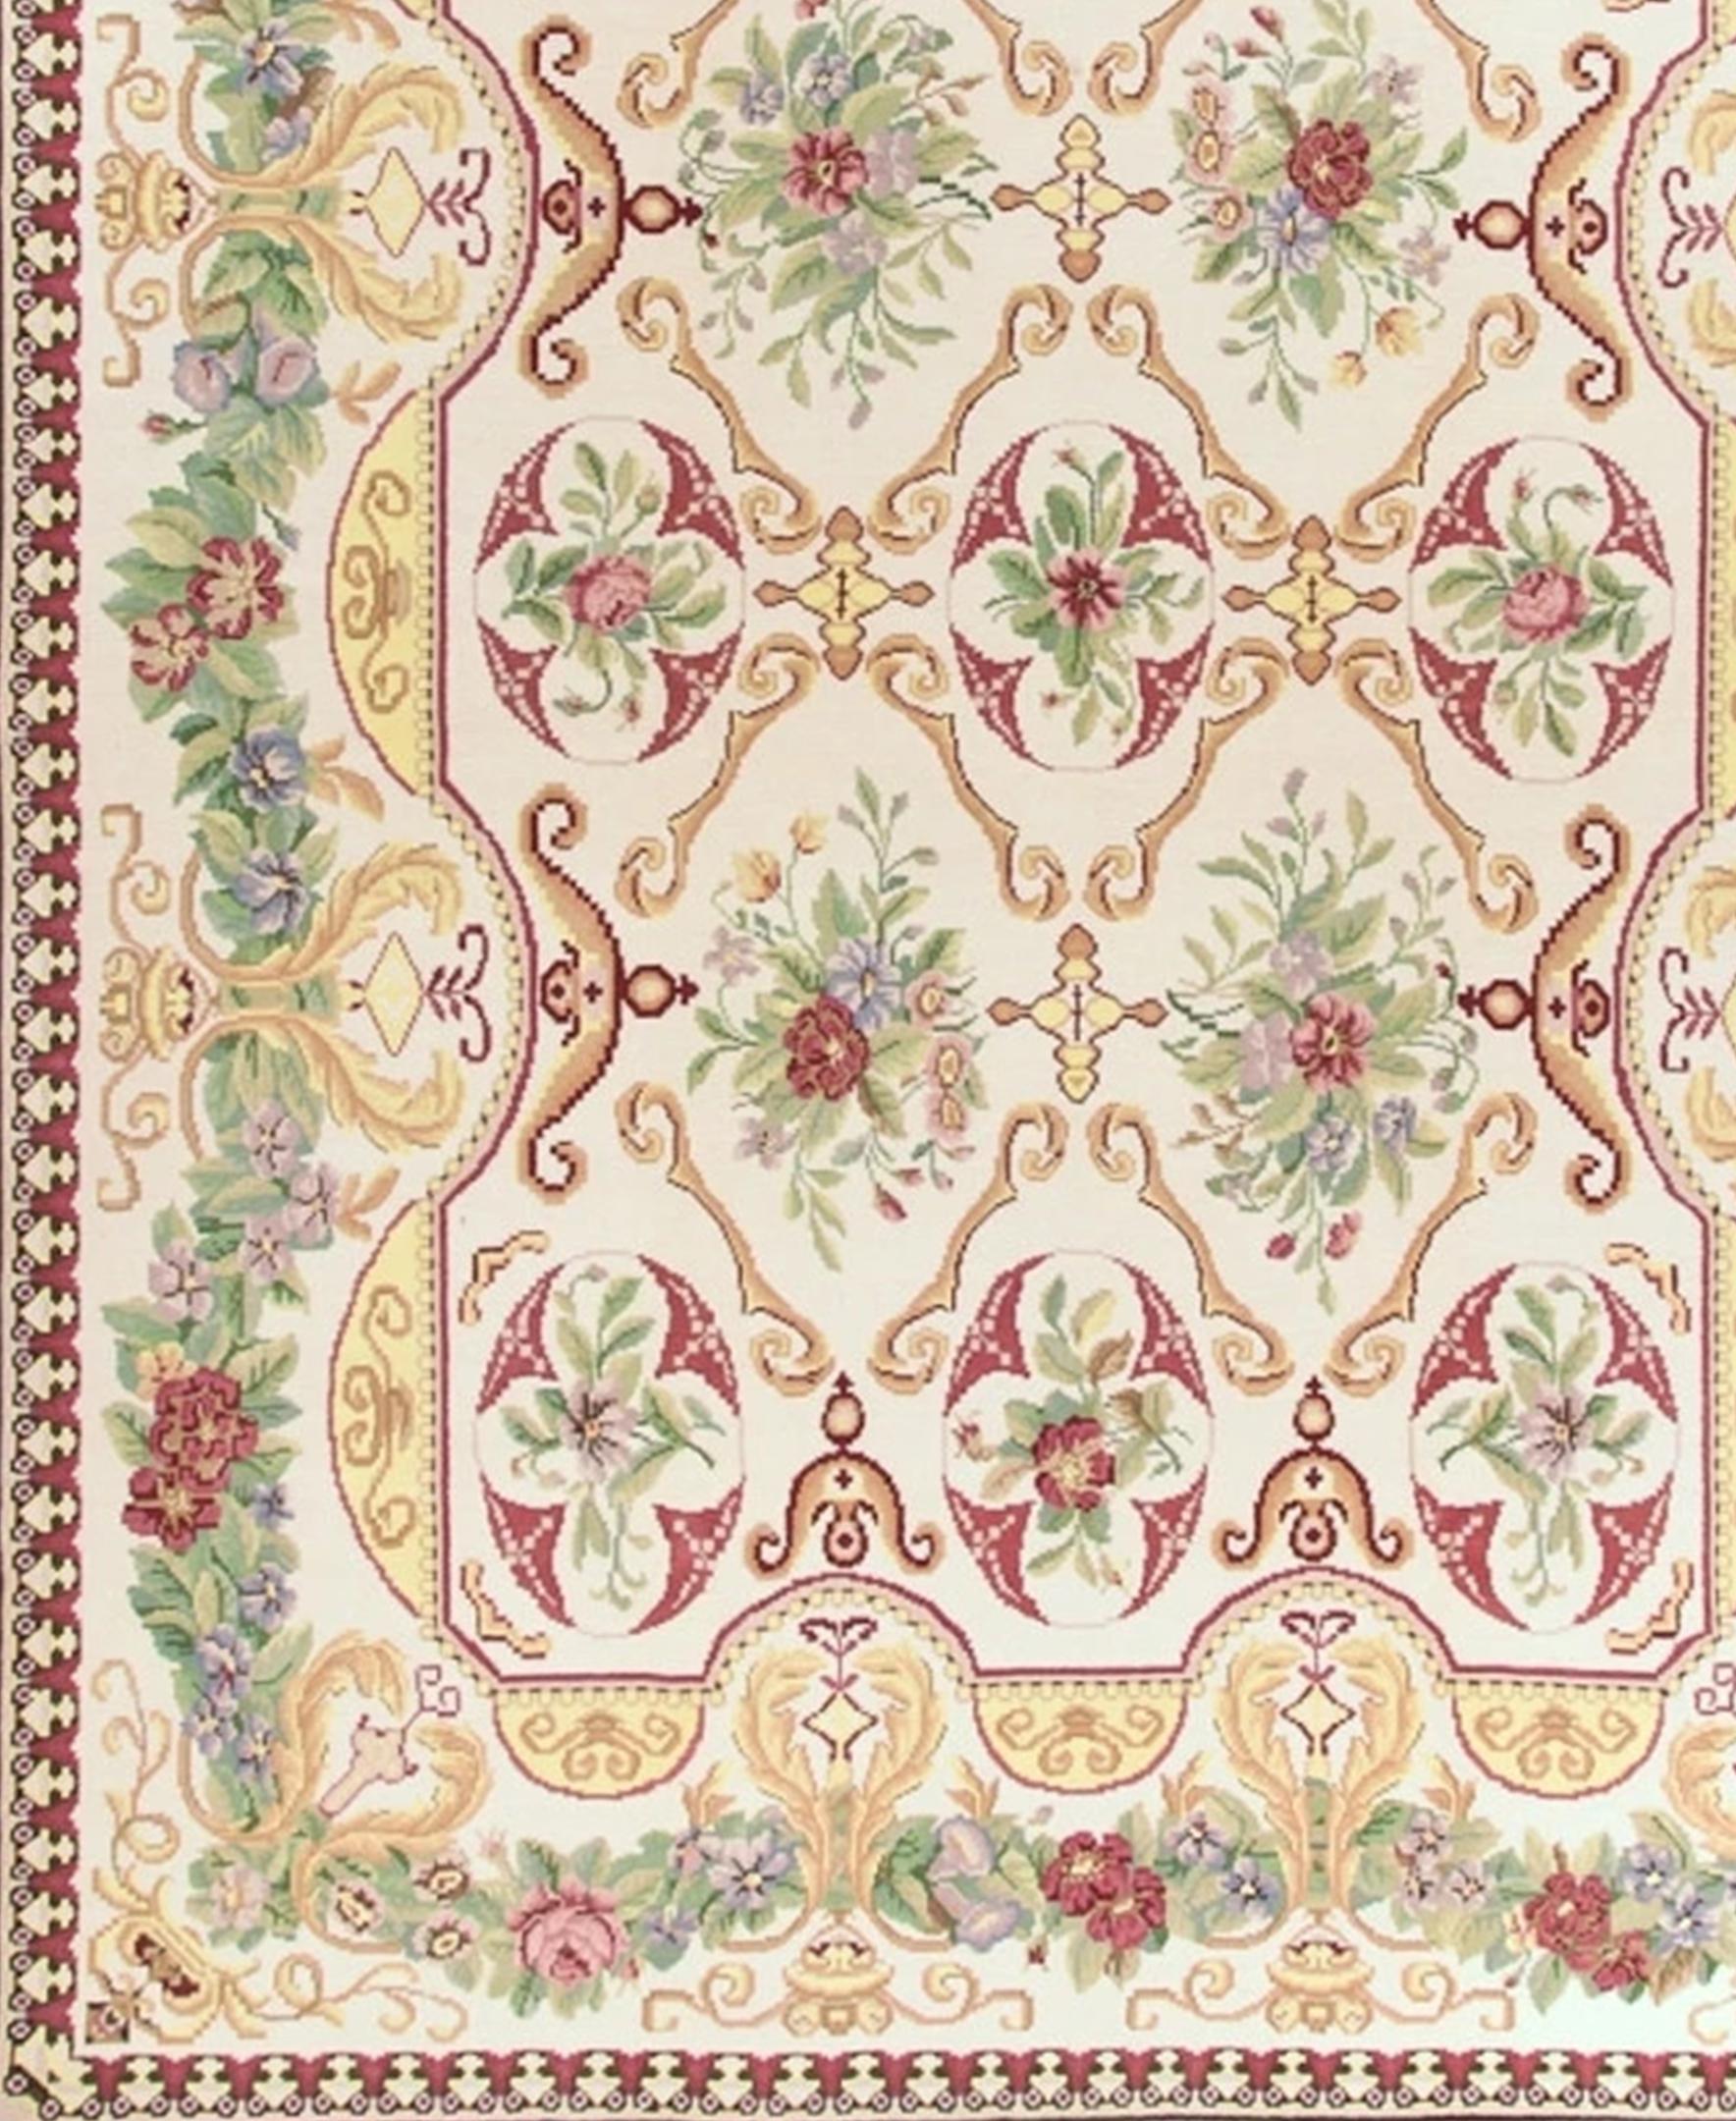 Based on an original painting by Elizabeth Moisan inspired by a Park Avenue interior designed by McMillen Inc. Mint, emerald, yellow, blue, aqua, lilac, orange and brick tones combine on an ivory ground in this charming Bessarabian pattern. Made